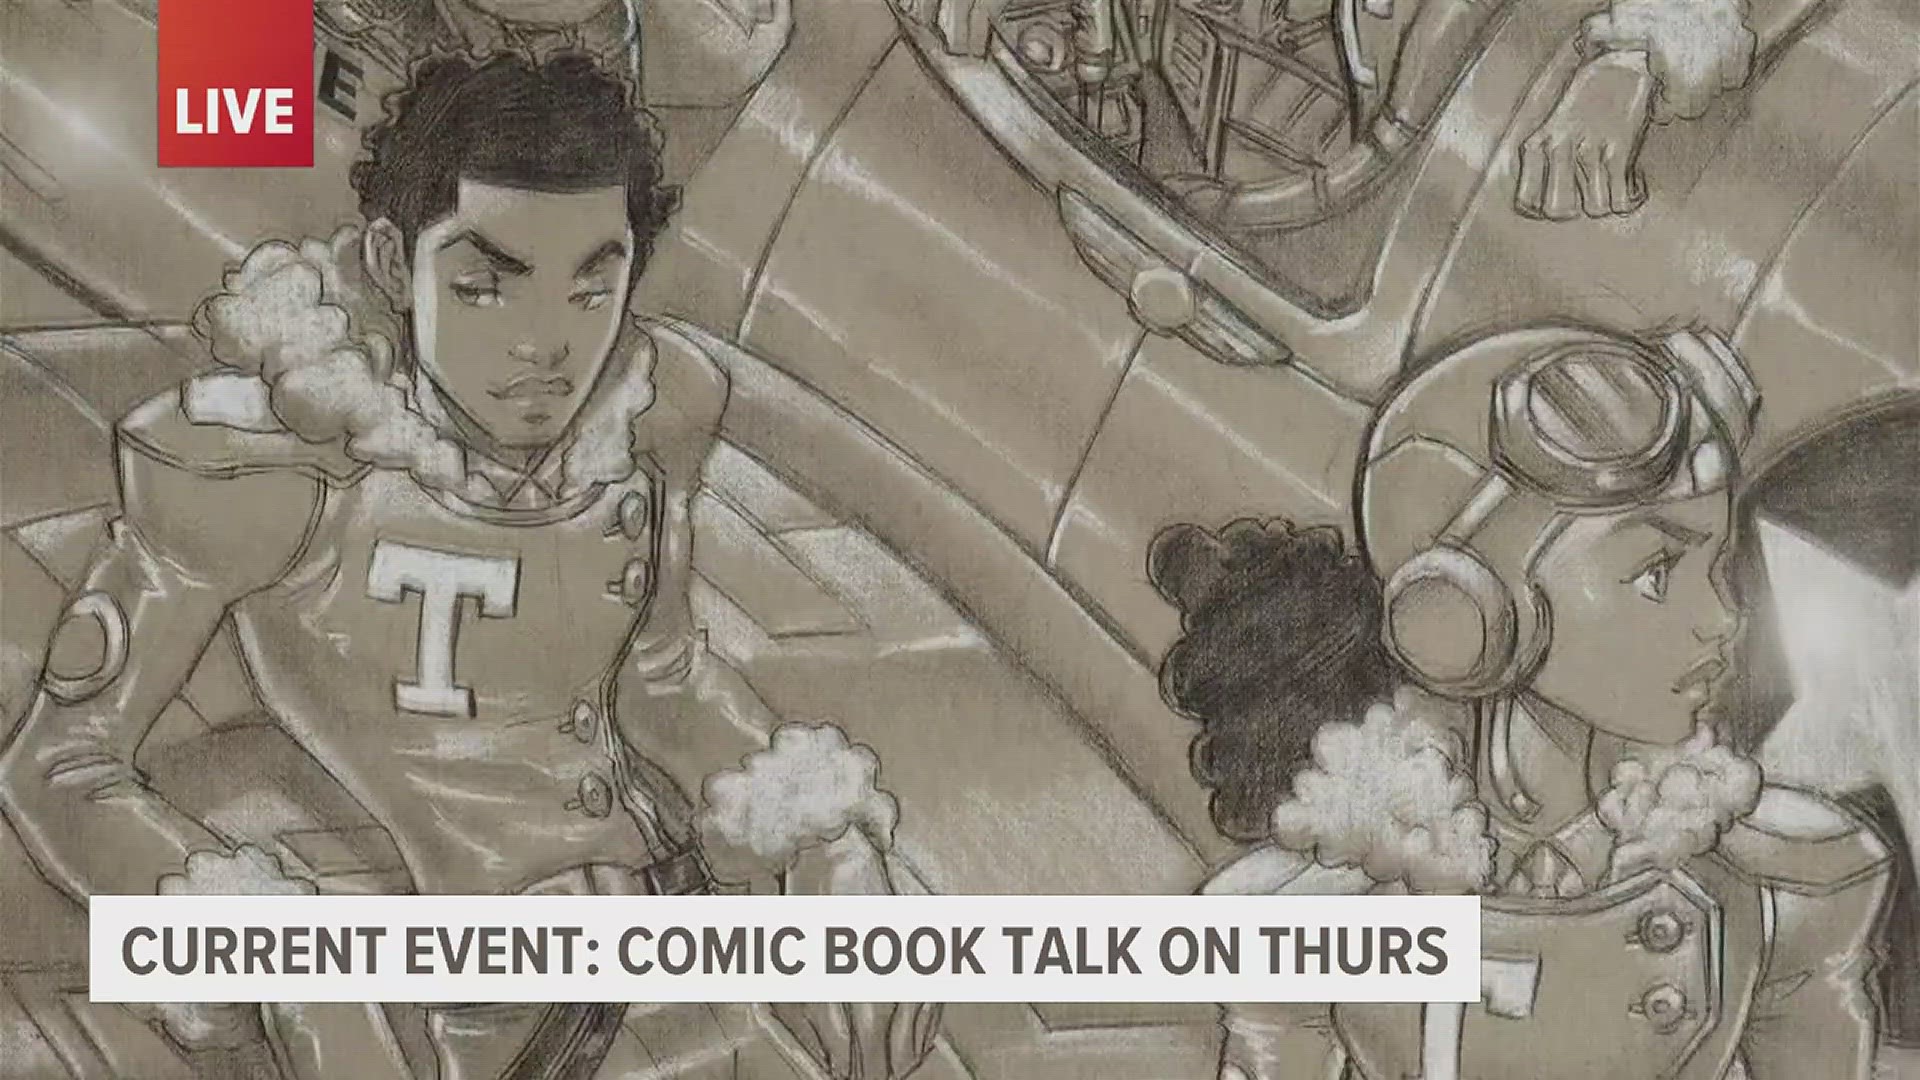 The co-creator of the comic series 'Tuskegee Heirs - Flames of Destiny' will be at Black Hawk College on Feb. 15 for a presentation, live drawings & career advice.